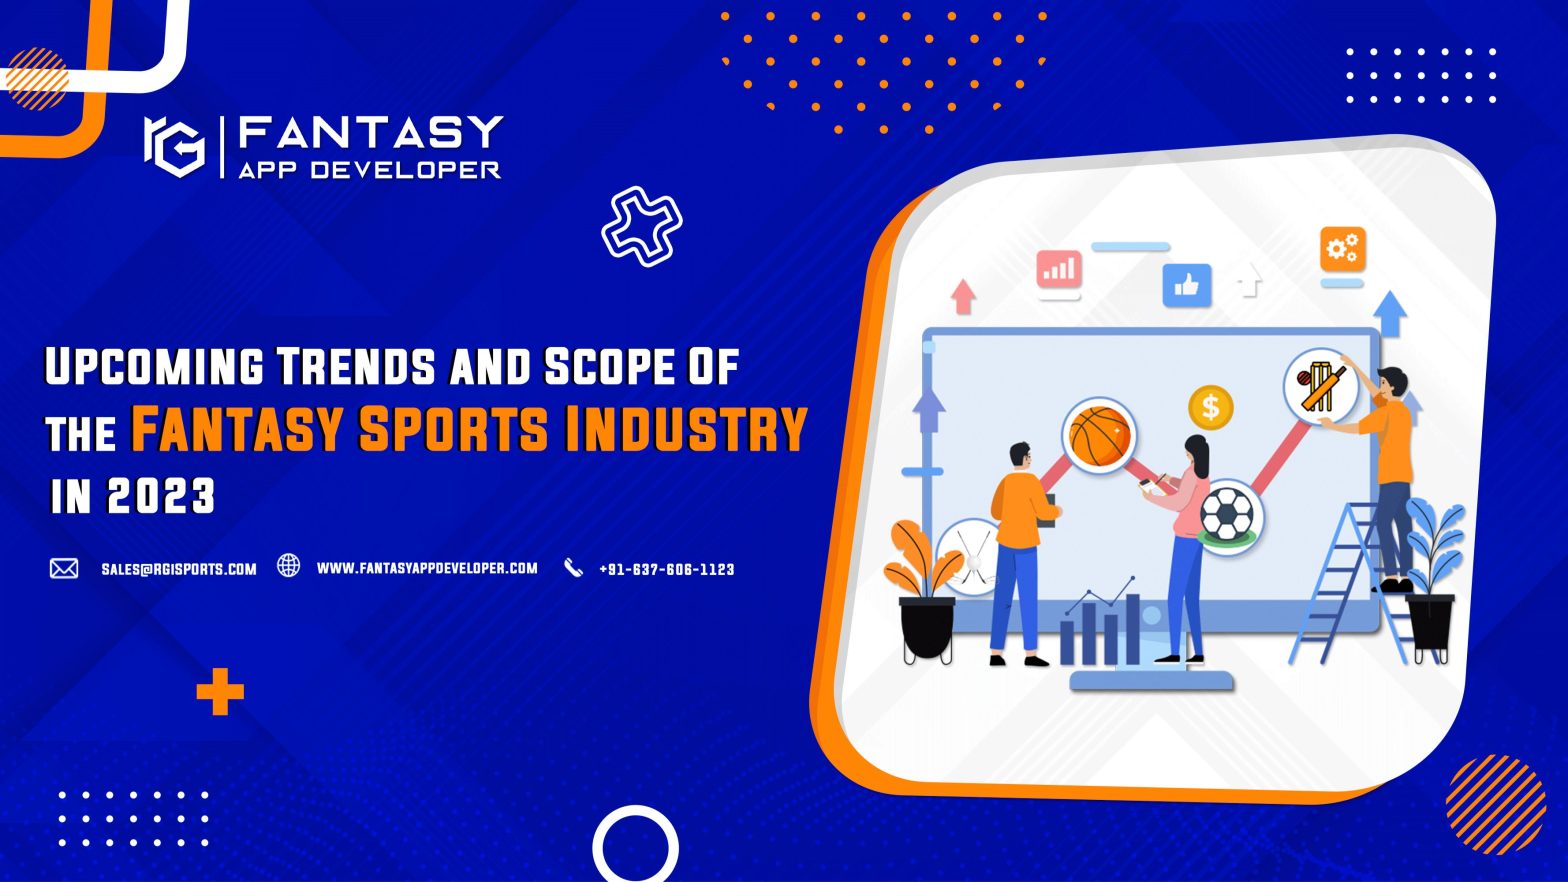 Upcoming Trends and Scope Of the Fantasy Sports Industry in 2023